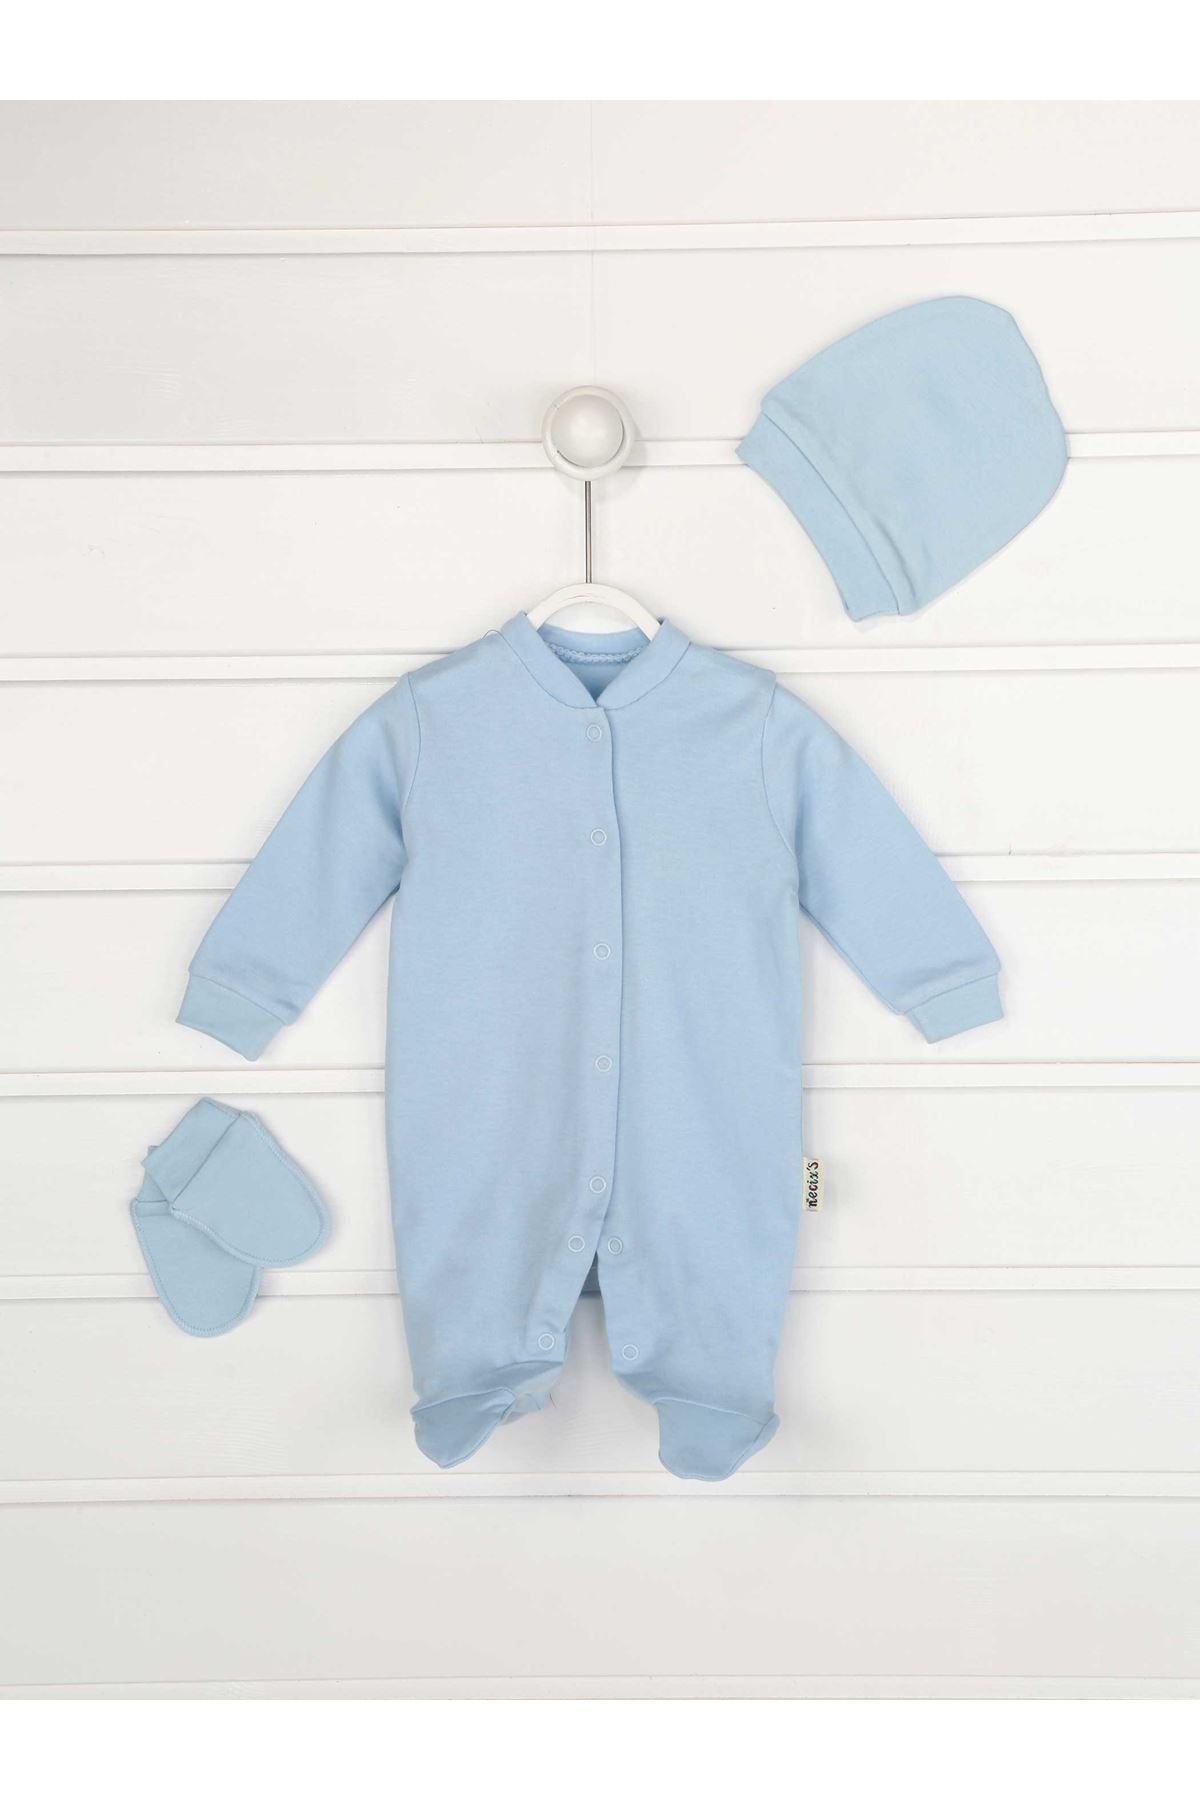 Blue baby boy solid color 3-piece suit overalls gloves hat infants cotton comfortable babies daily newborn hospital outlet model